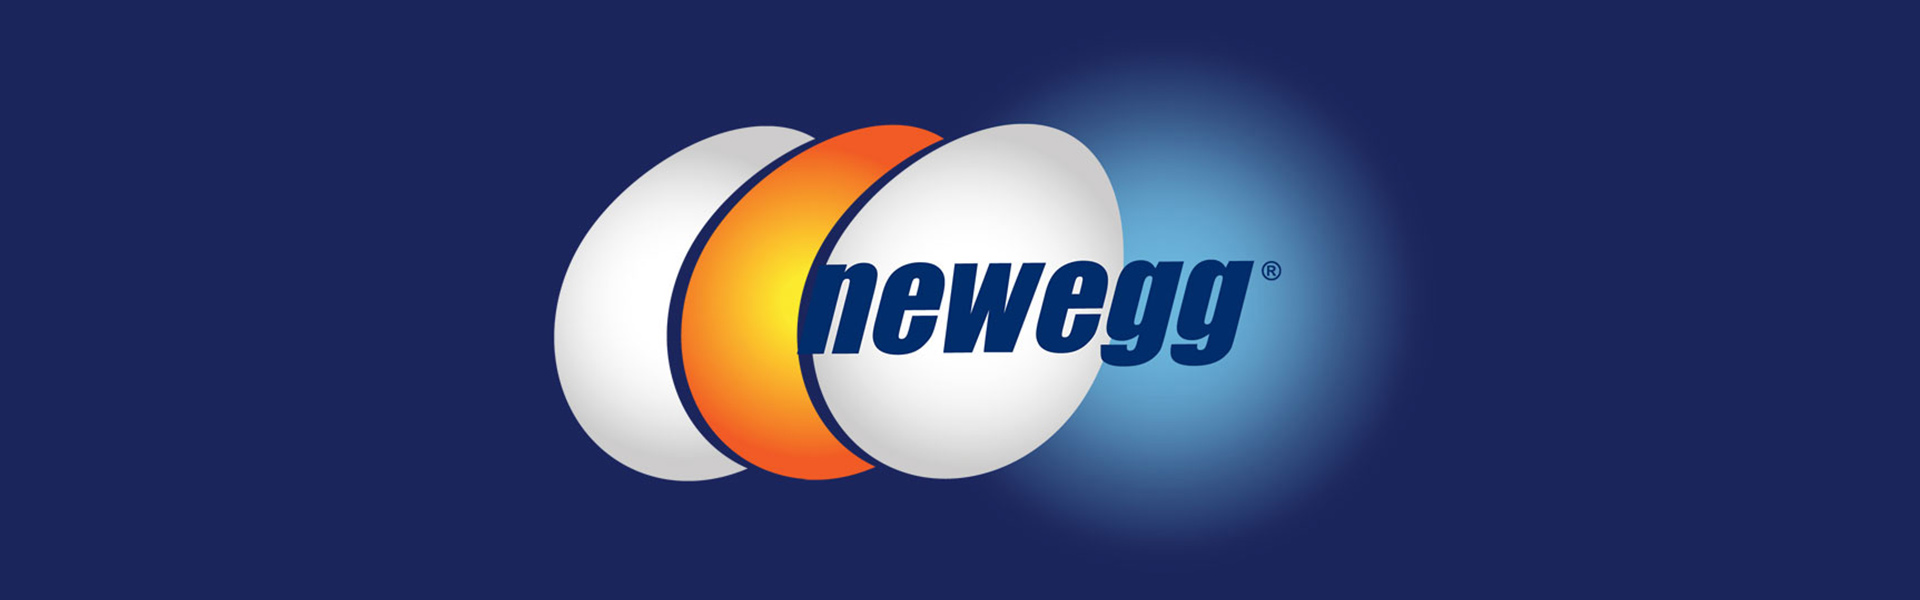 Newegg Reaffirms Its Full-Year 2021 Financial Forecast, Opens Limited Trading Window for Restricted Shares